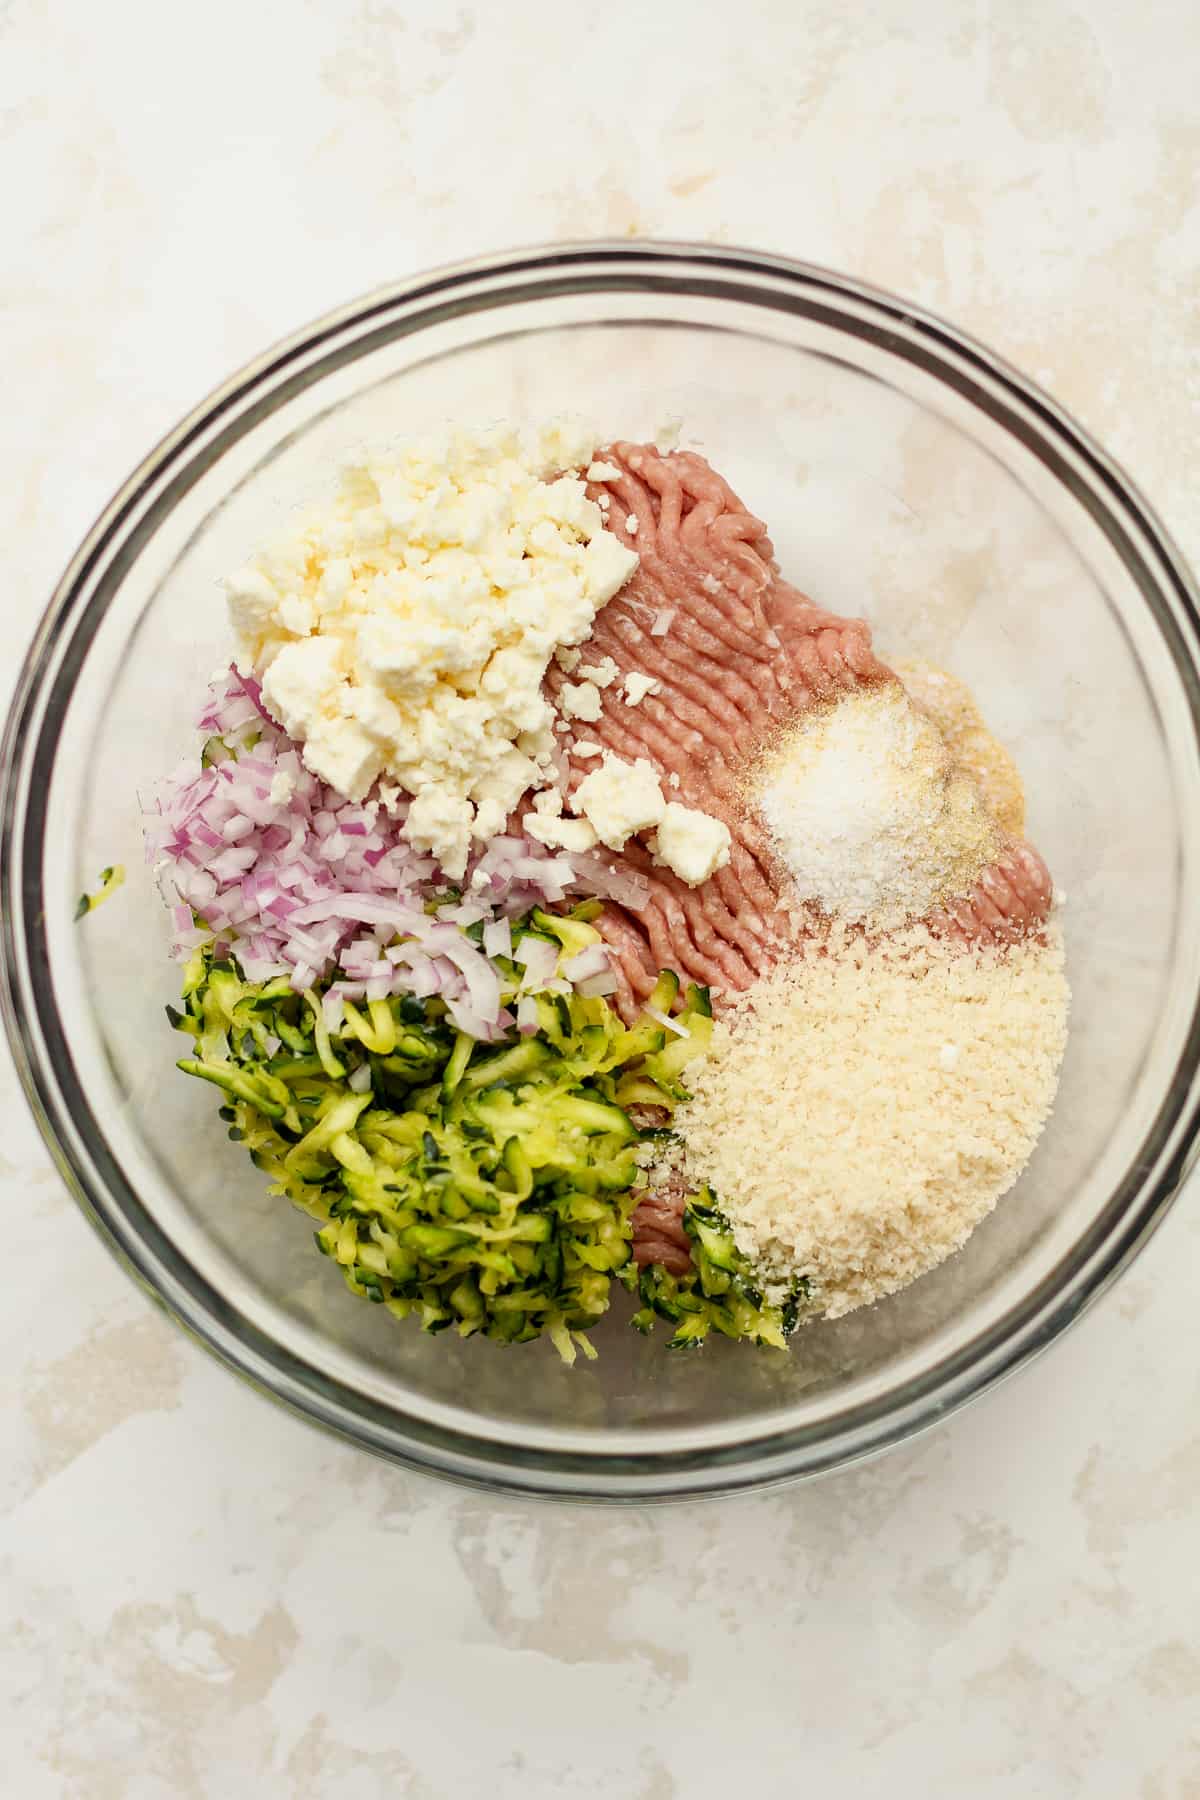 A bowl of the turkey burger ingredients.